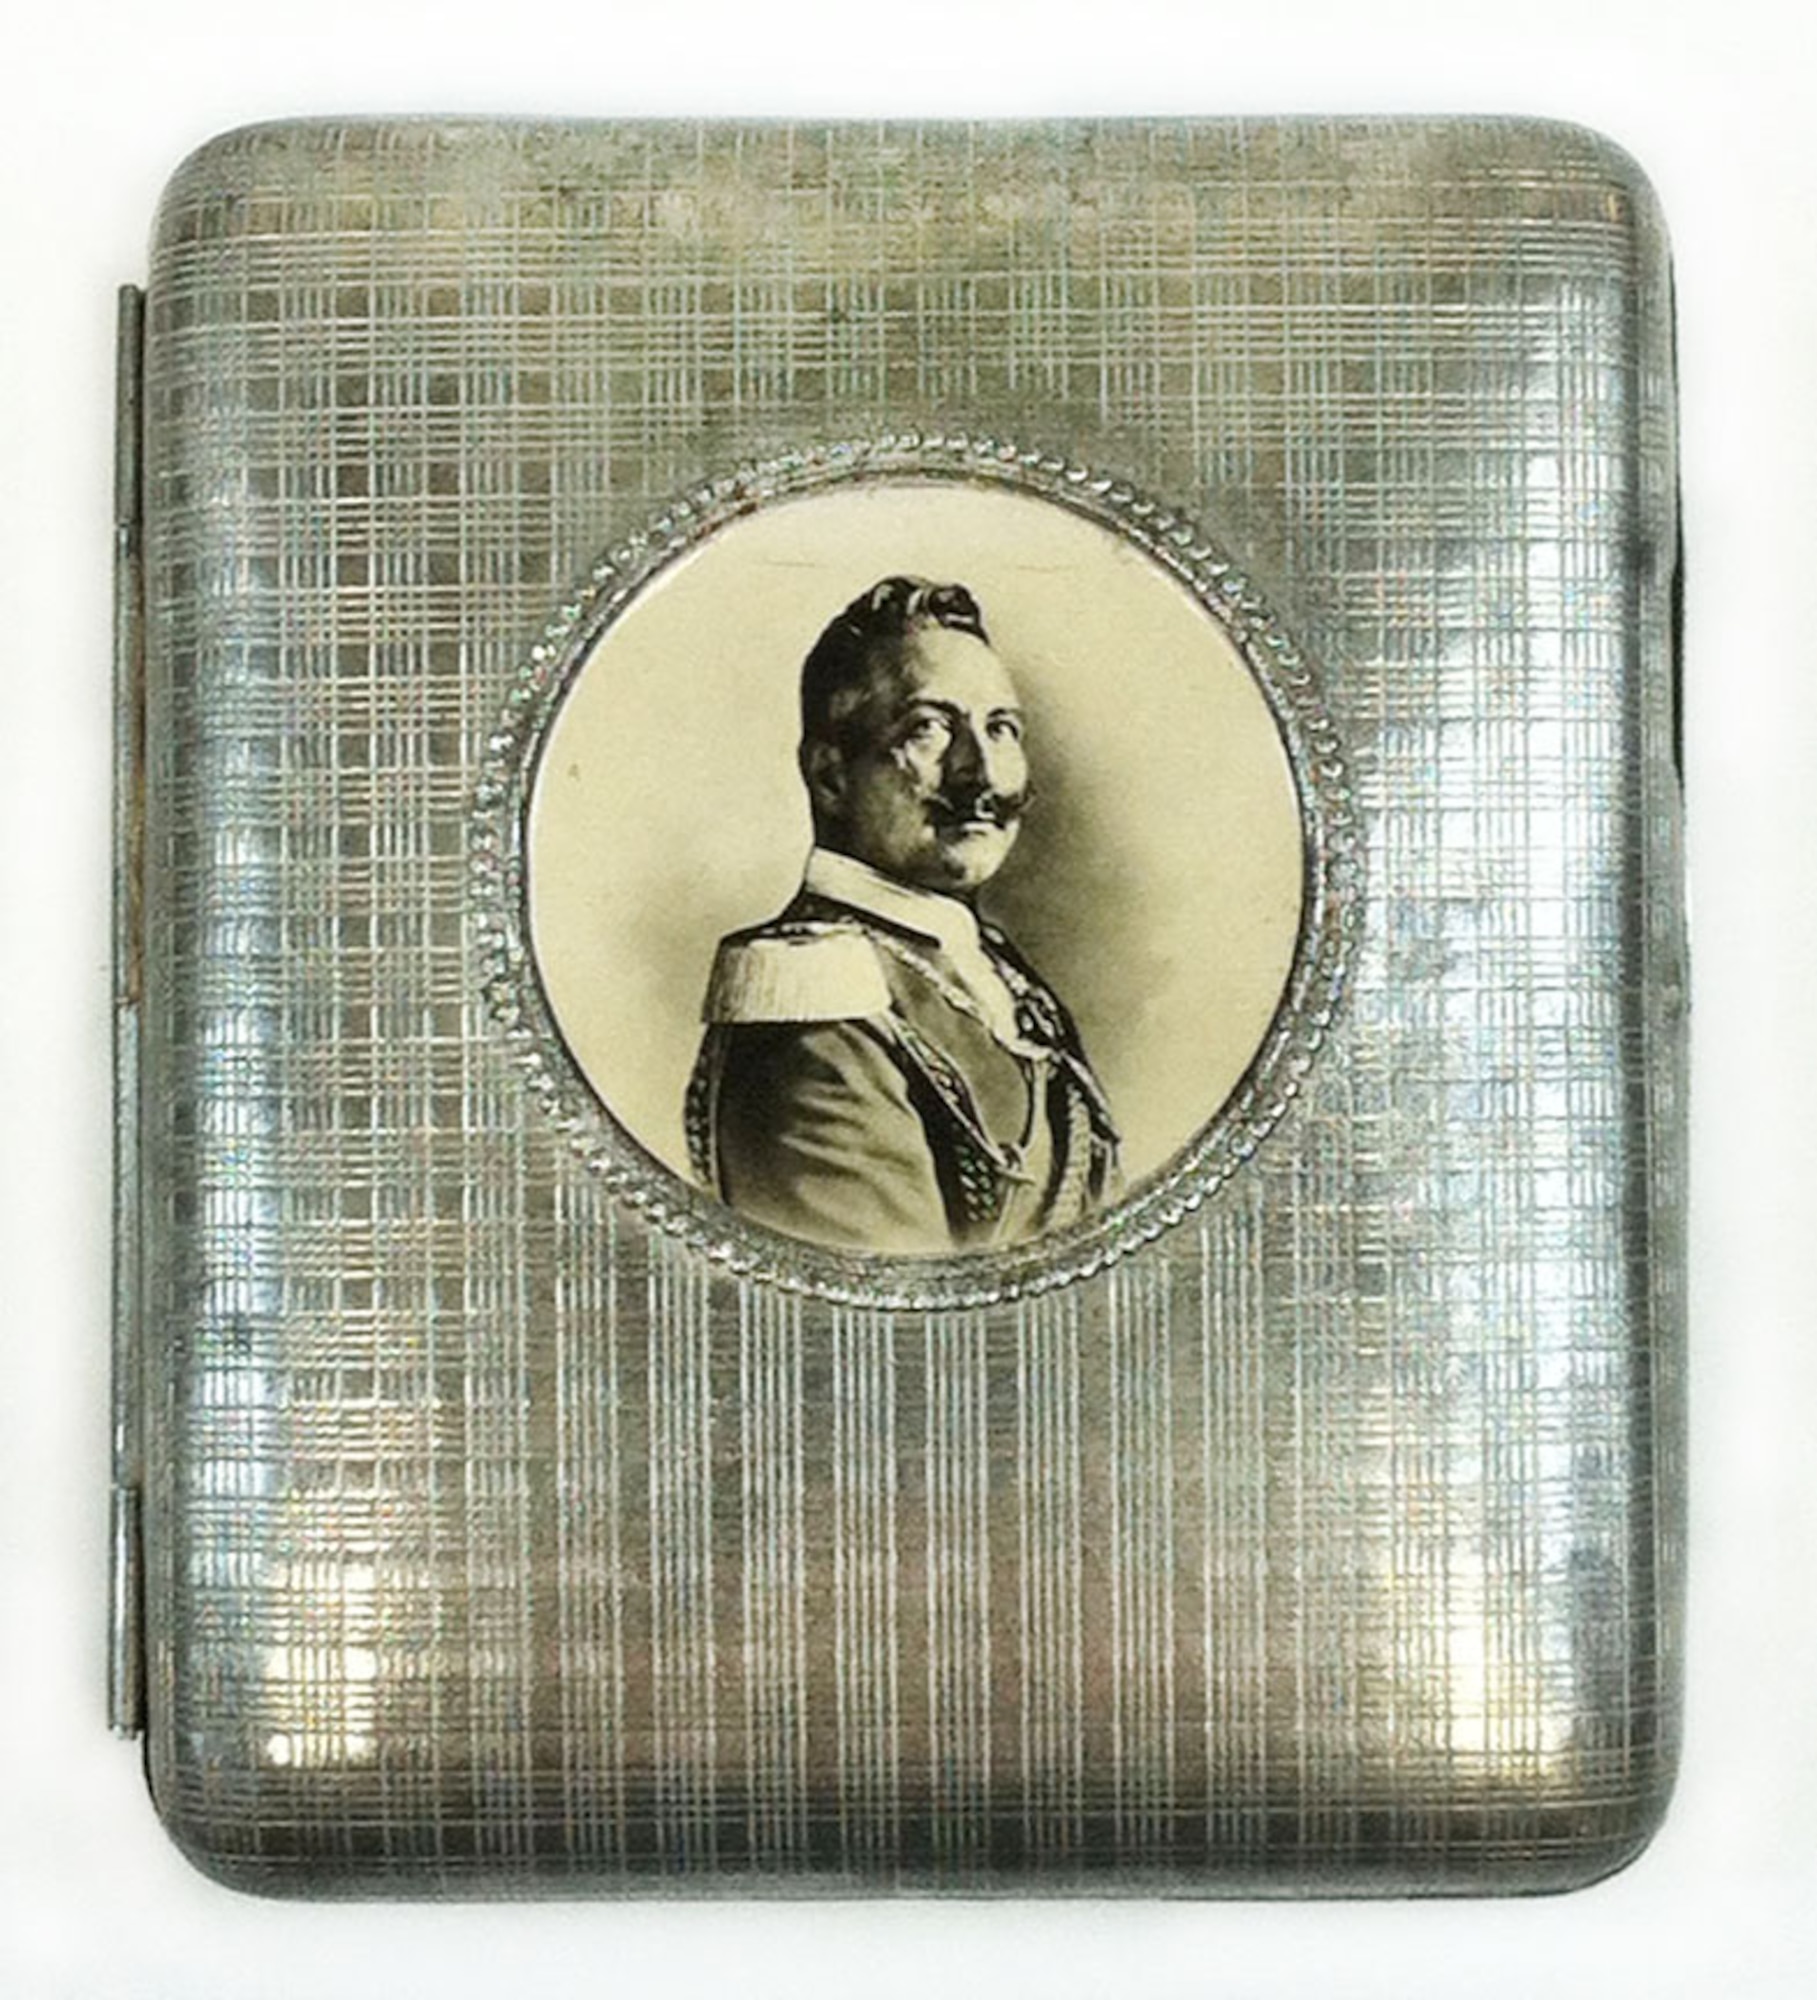 The front exterior of this metal cigarette case displays a photo of Kaiser Wilhelm II, who was the last King of Prussia. He reigned from 1888 to 1918. His great-uncle was Frederick Wilhelm IV, who in 1842 designed the pickelhaube, which became the helmet worn by the Prussian army. Capt. Edward V. Rickenbacker, America’s highest scoring ace of WWI, brought this Prussian cigarette case home as a wartime souvenir. It is unknown how he attained it.